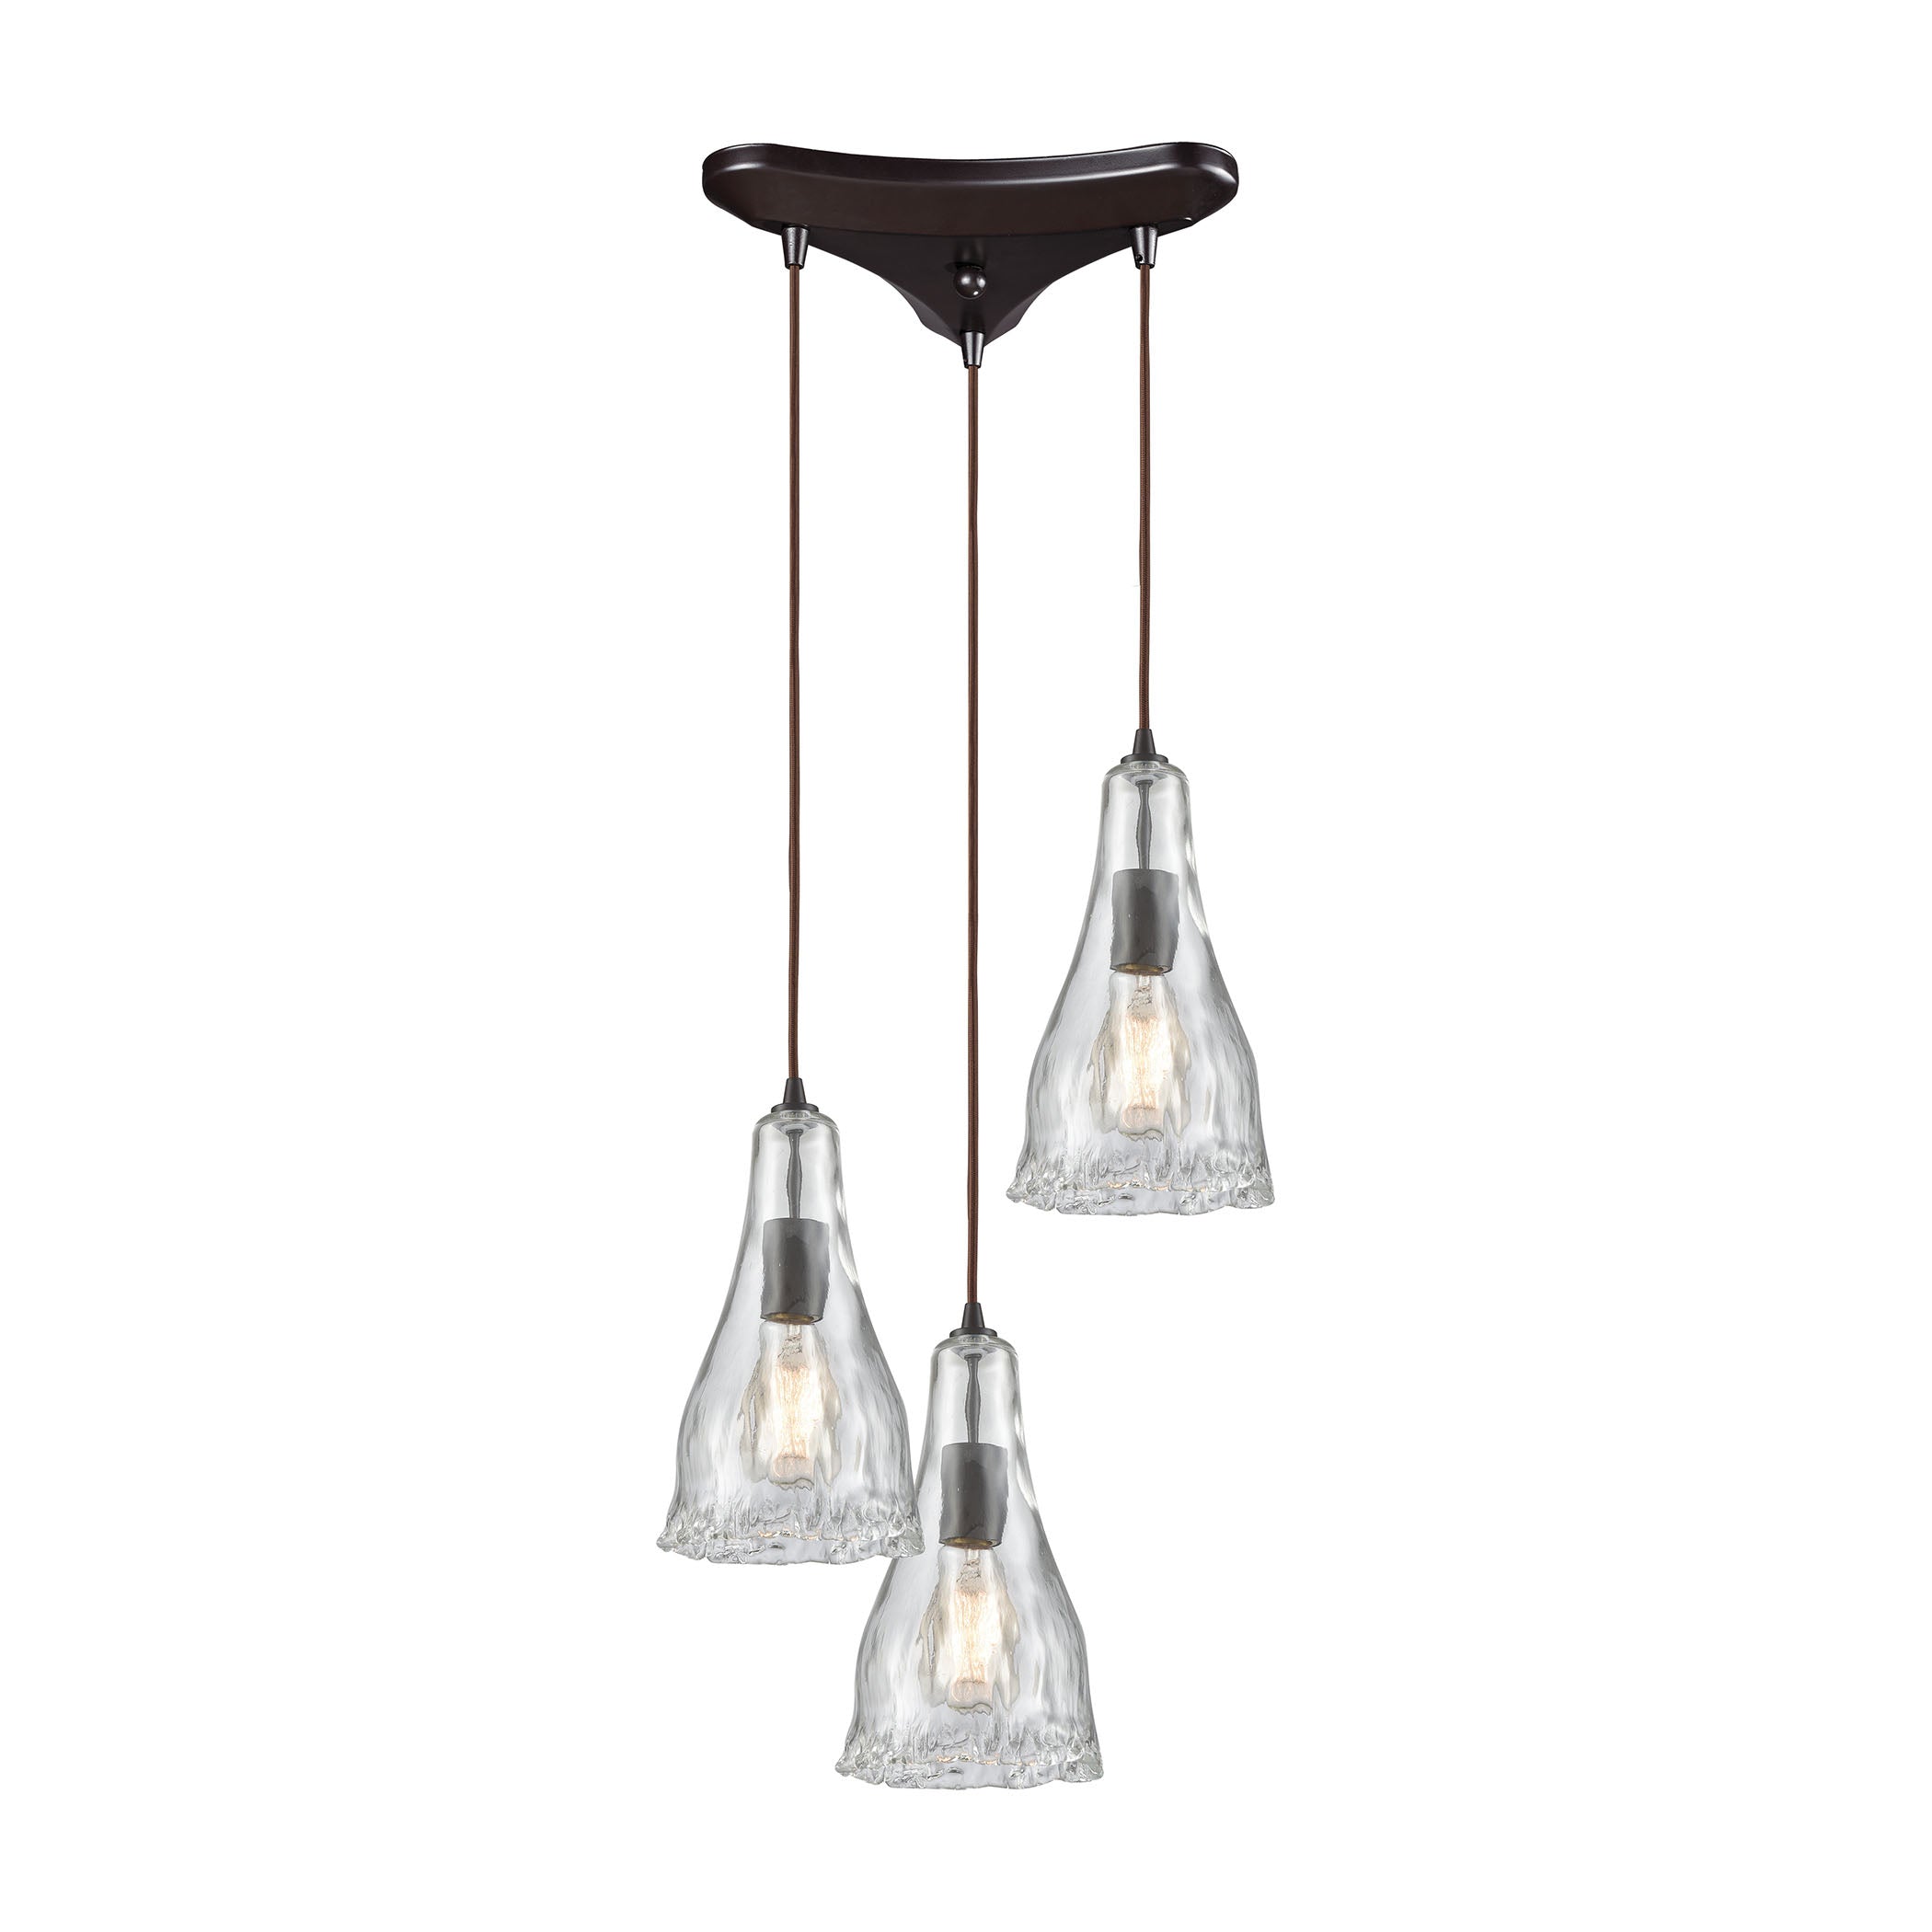 ELK Lighting 10446/3 Hand Formed Glass 3-Light Triangular Pendant Fixture in Oiled Bronze with Clear Hand-formed Glass